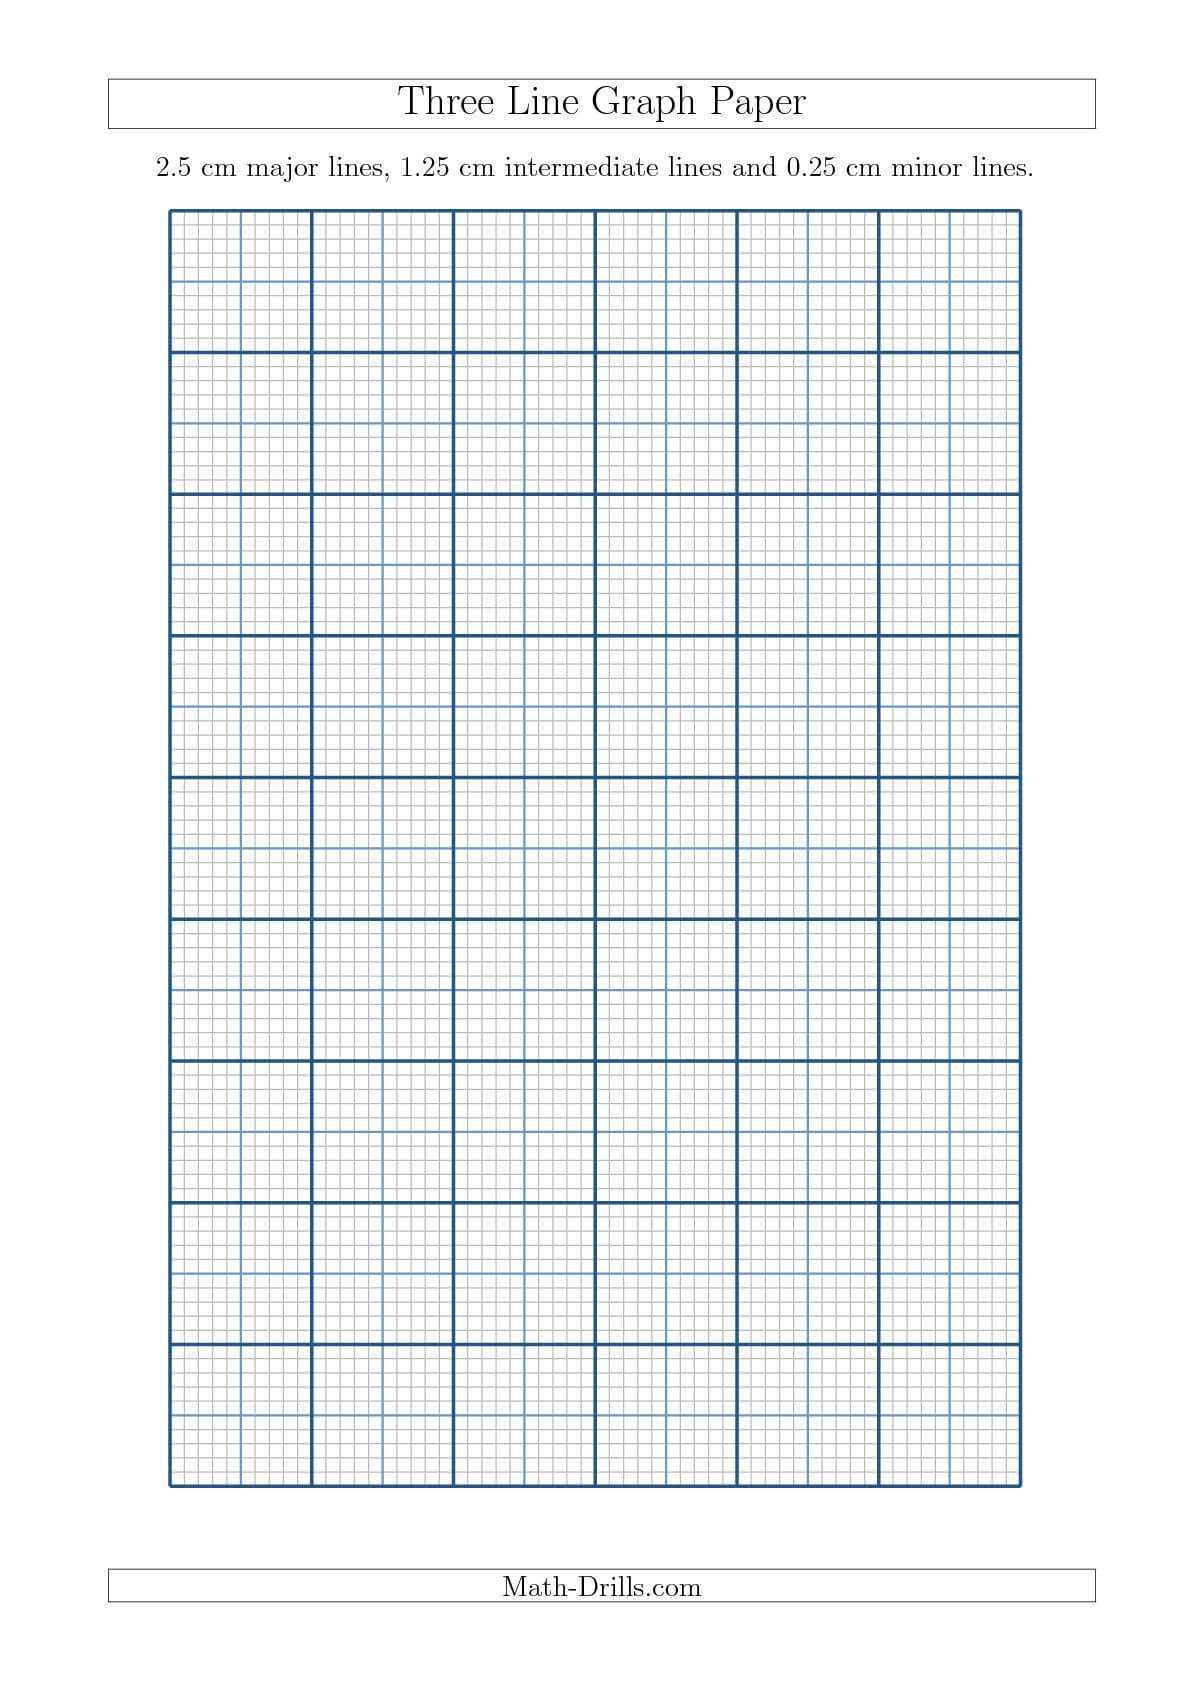 New A4 Sizes Added 2015 09 18! Three Line Graph Paper With For 1 Cm Graph Paper Template Word